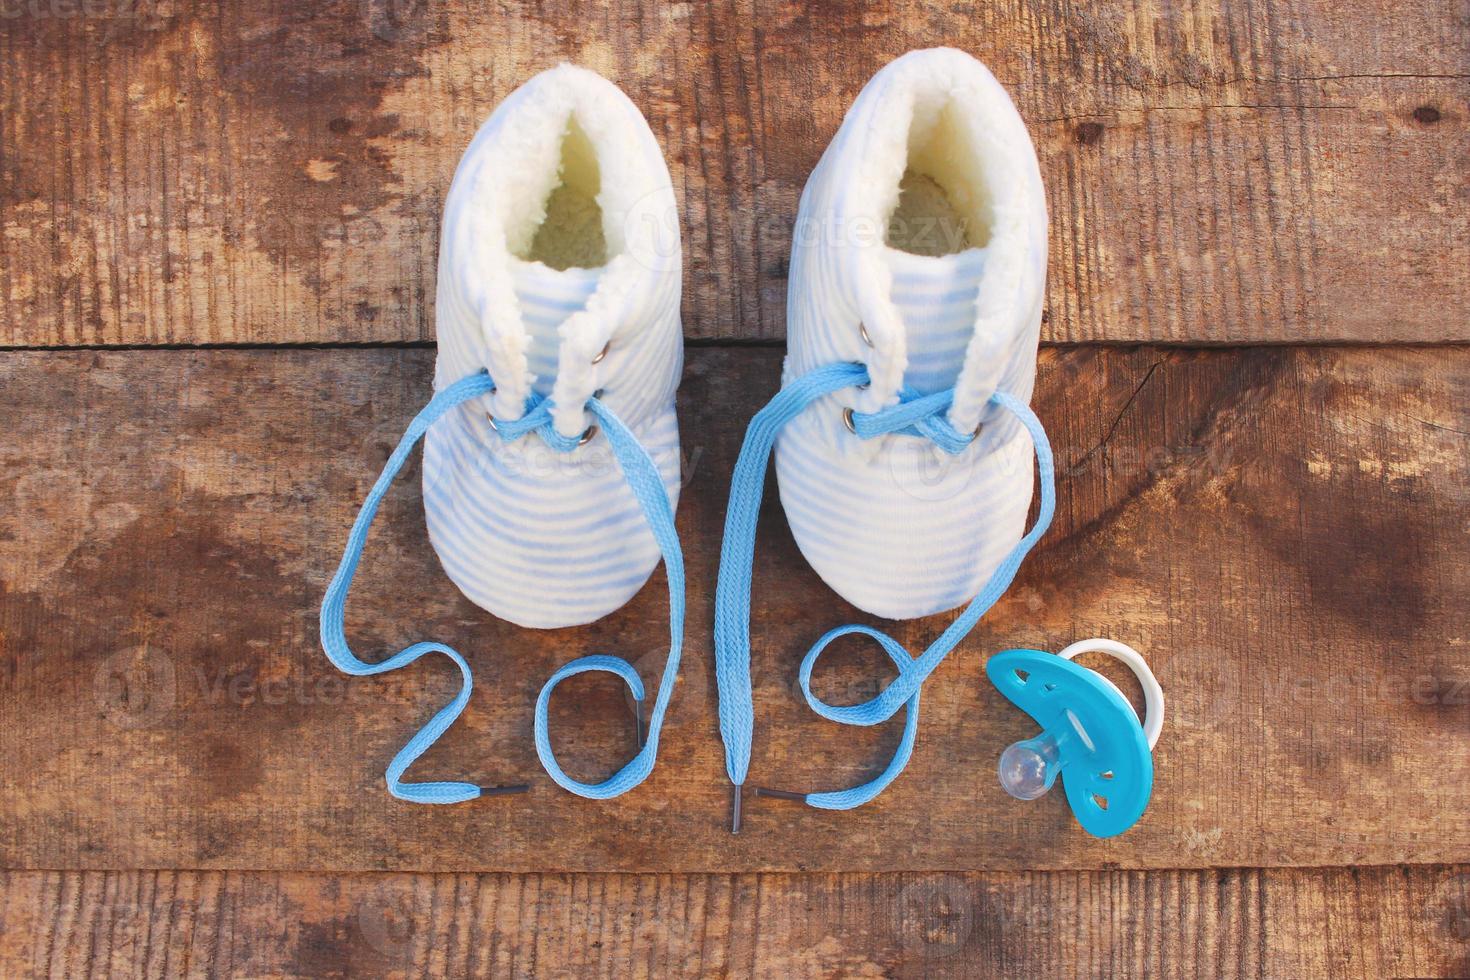 2019 new year written laces of children's shoes and pacifier on old wooden background. Top view. Flat lay. Toned image. photo